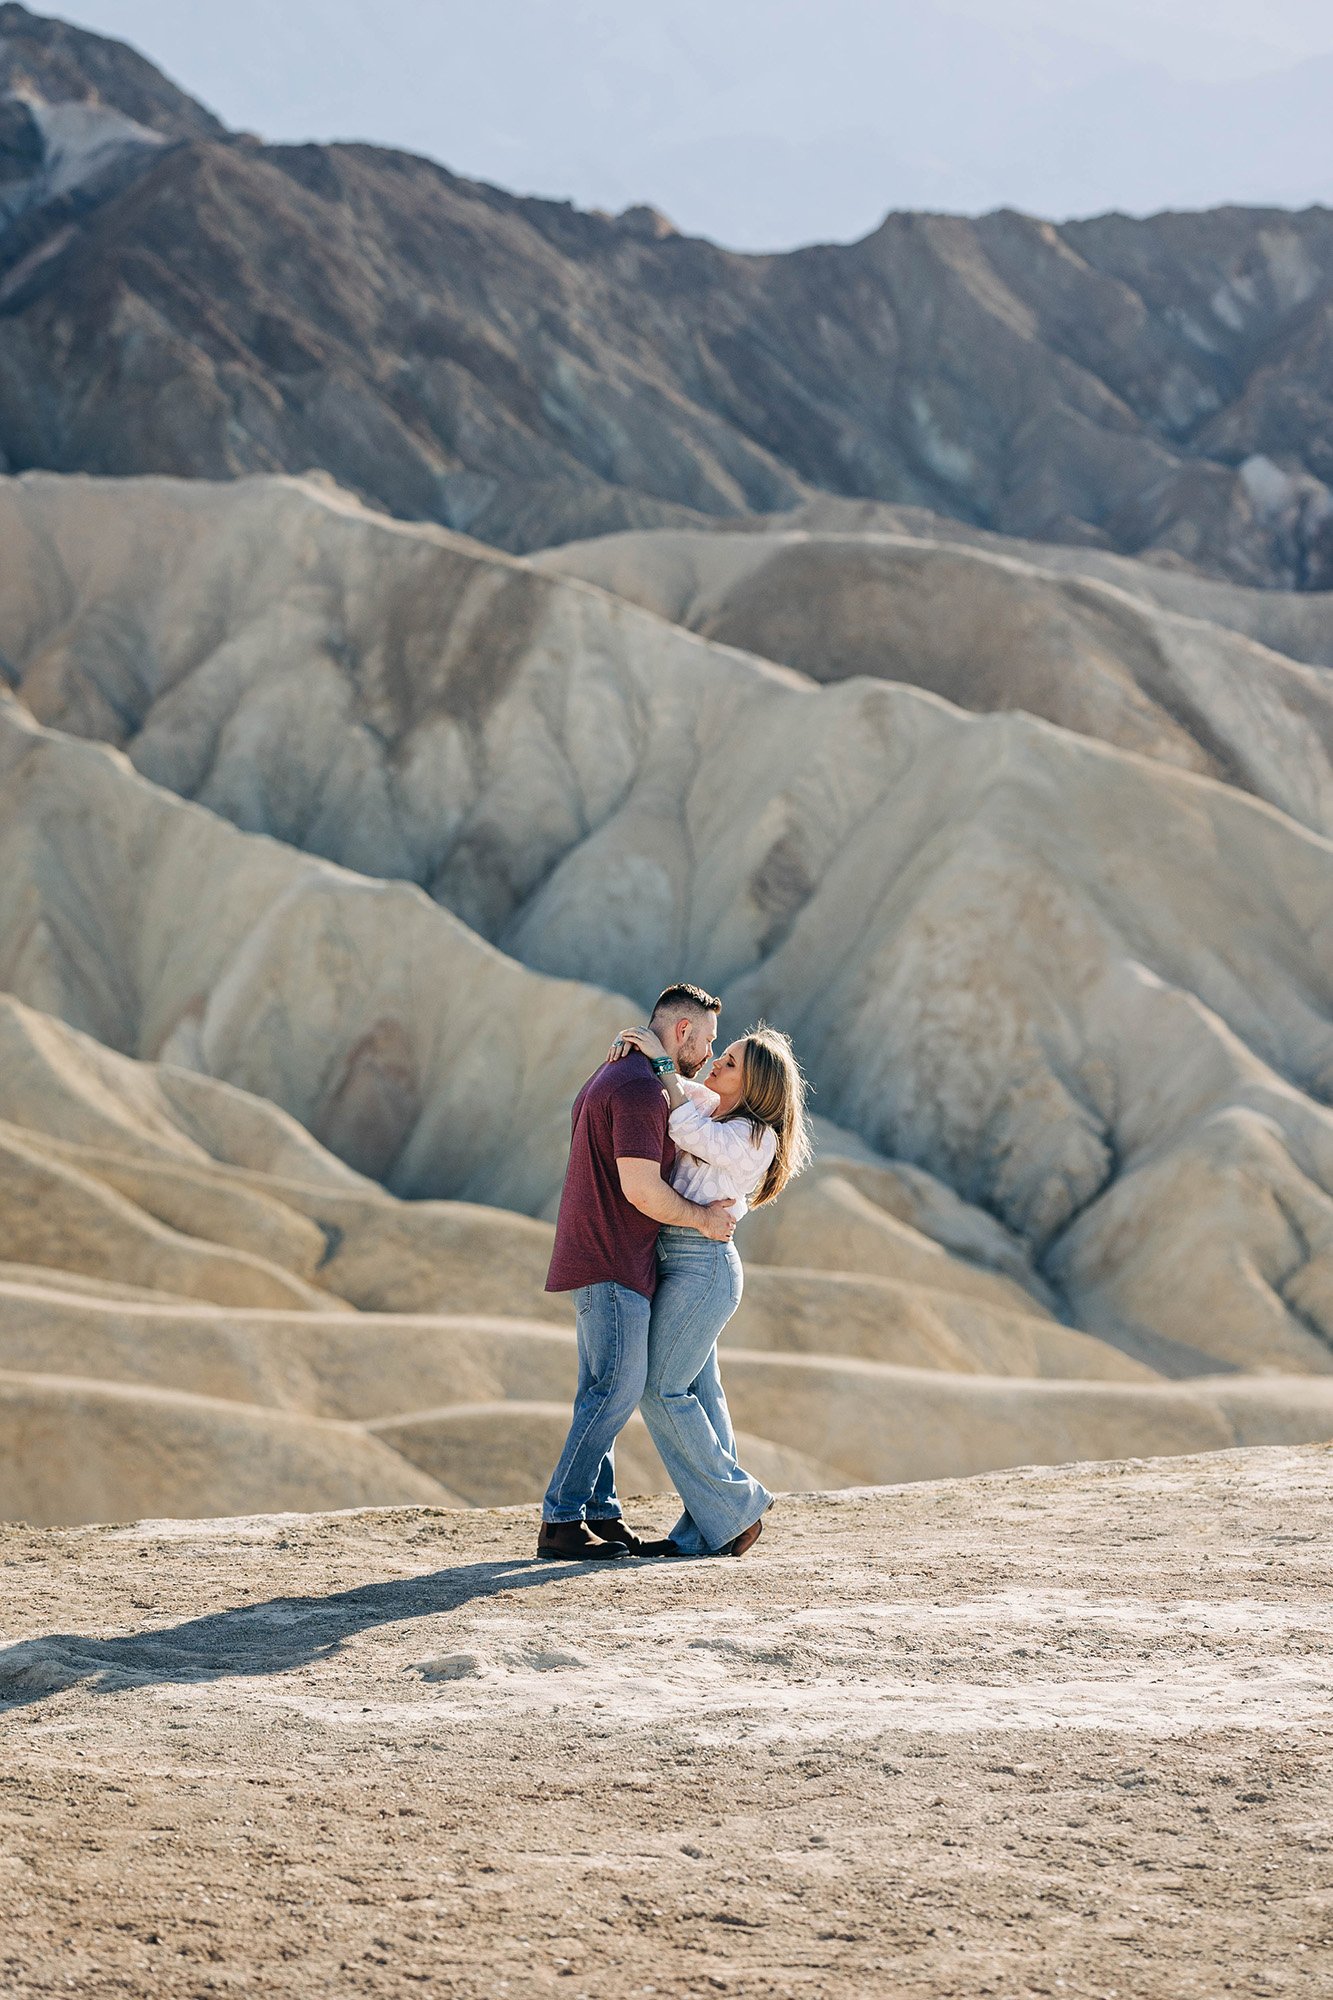 A couple embraces in front of rolling desert mountains.